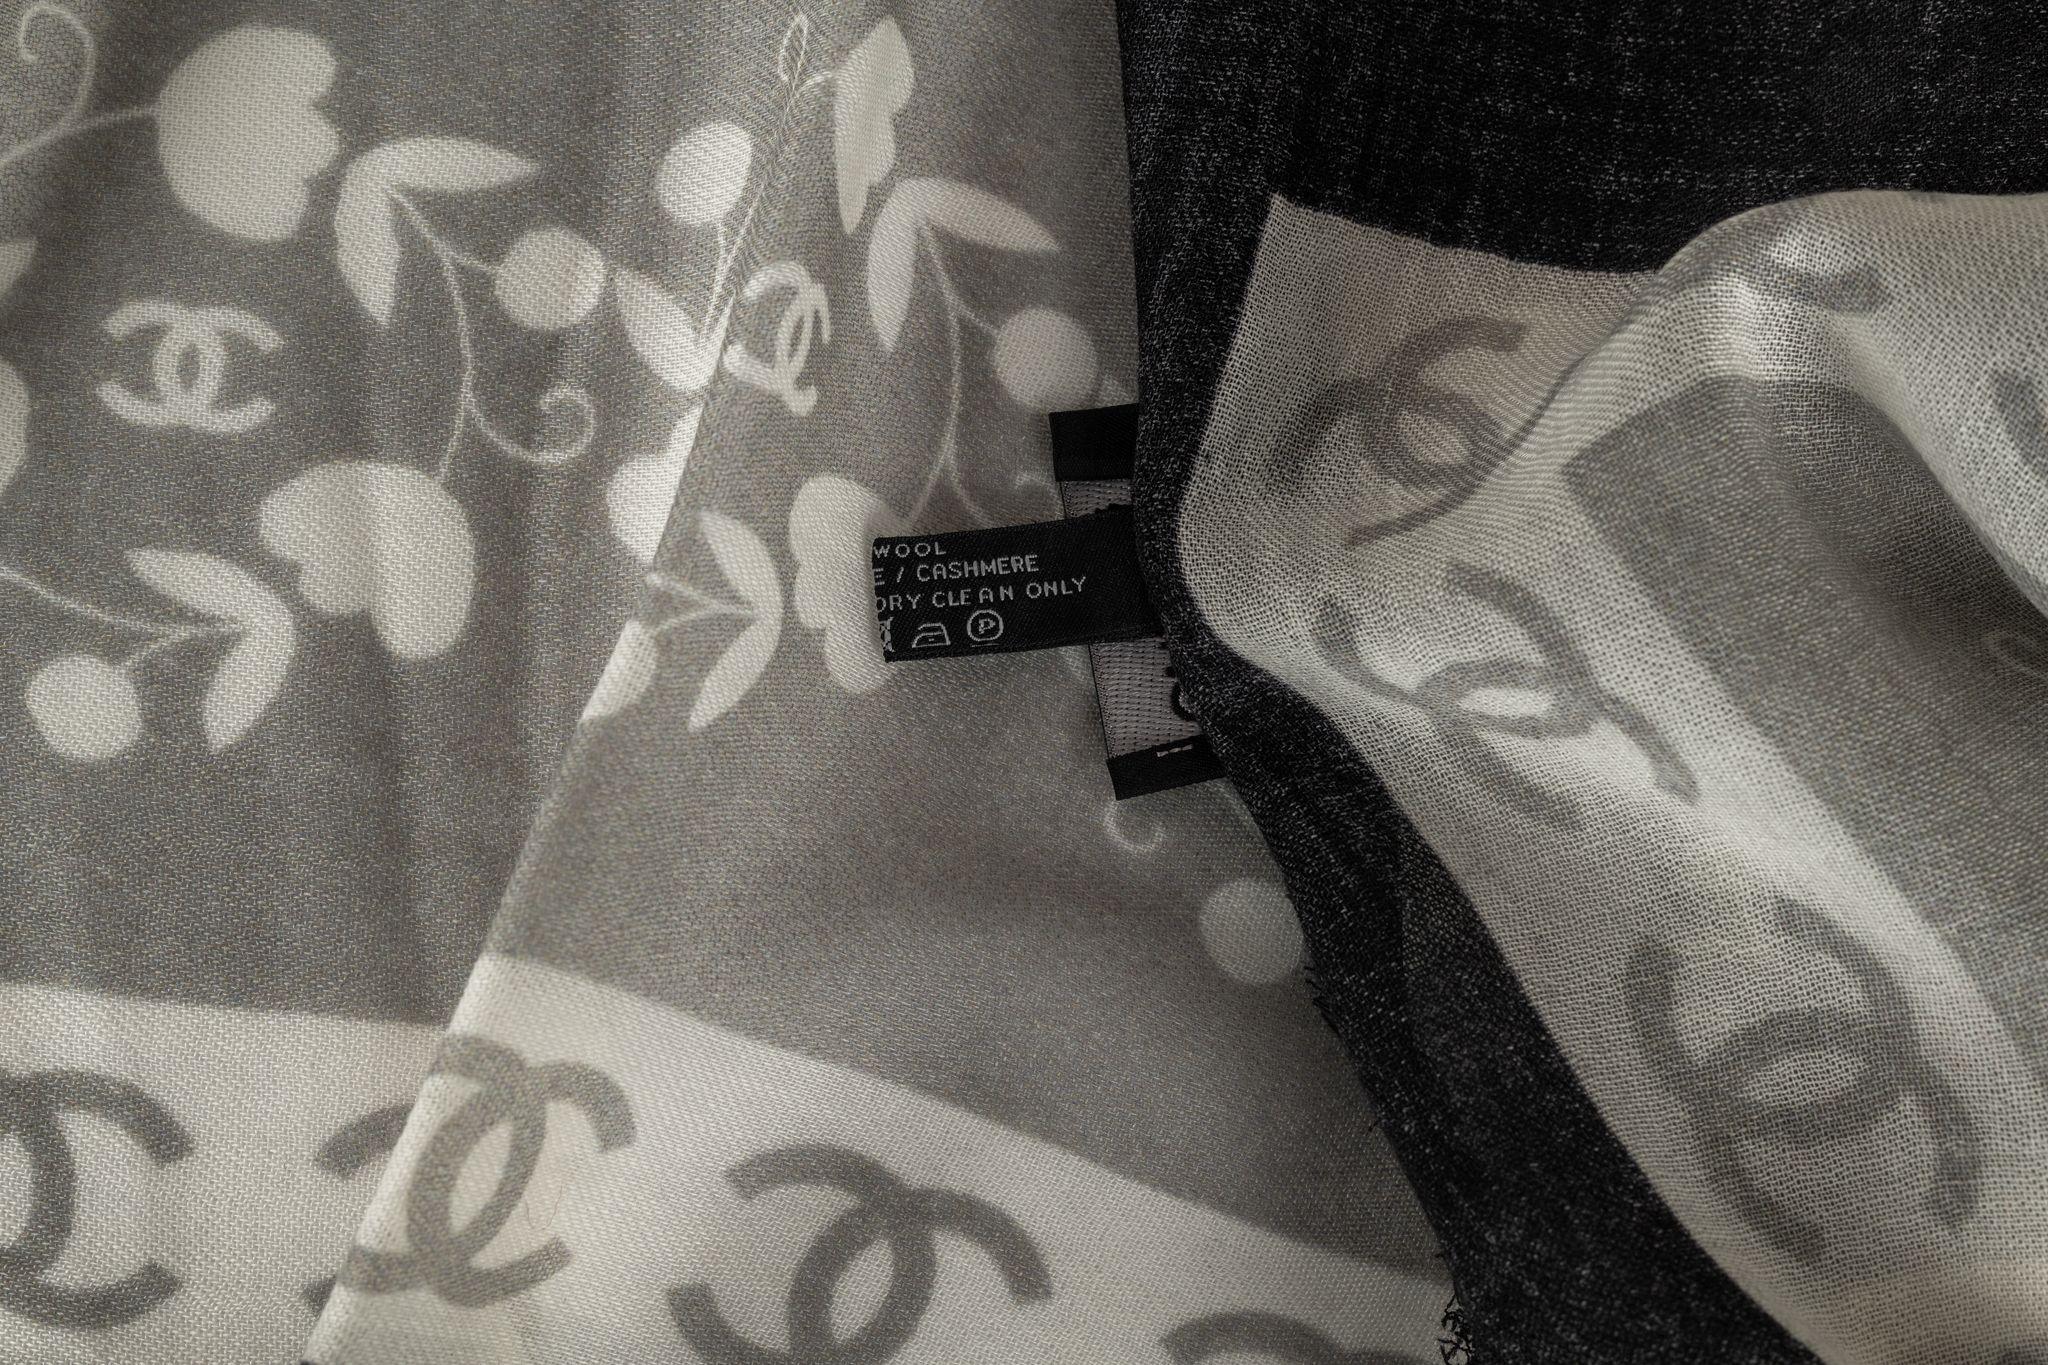 Chanel cashmere shawl in white, grey, black with a big CC logo print in the center. The frame consists of a pattern of hearts and cc logos. The item is in new condition.